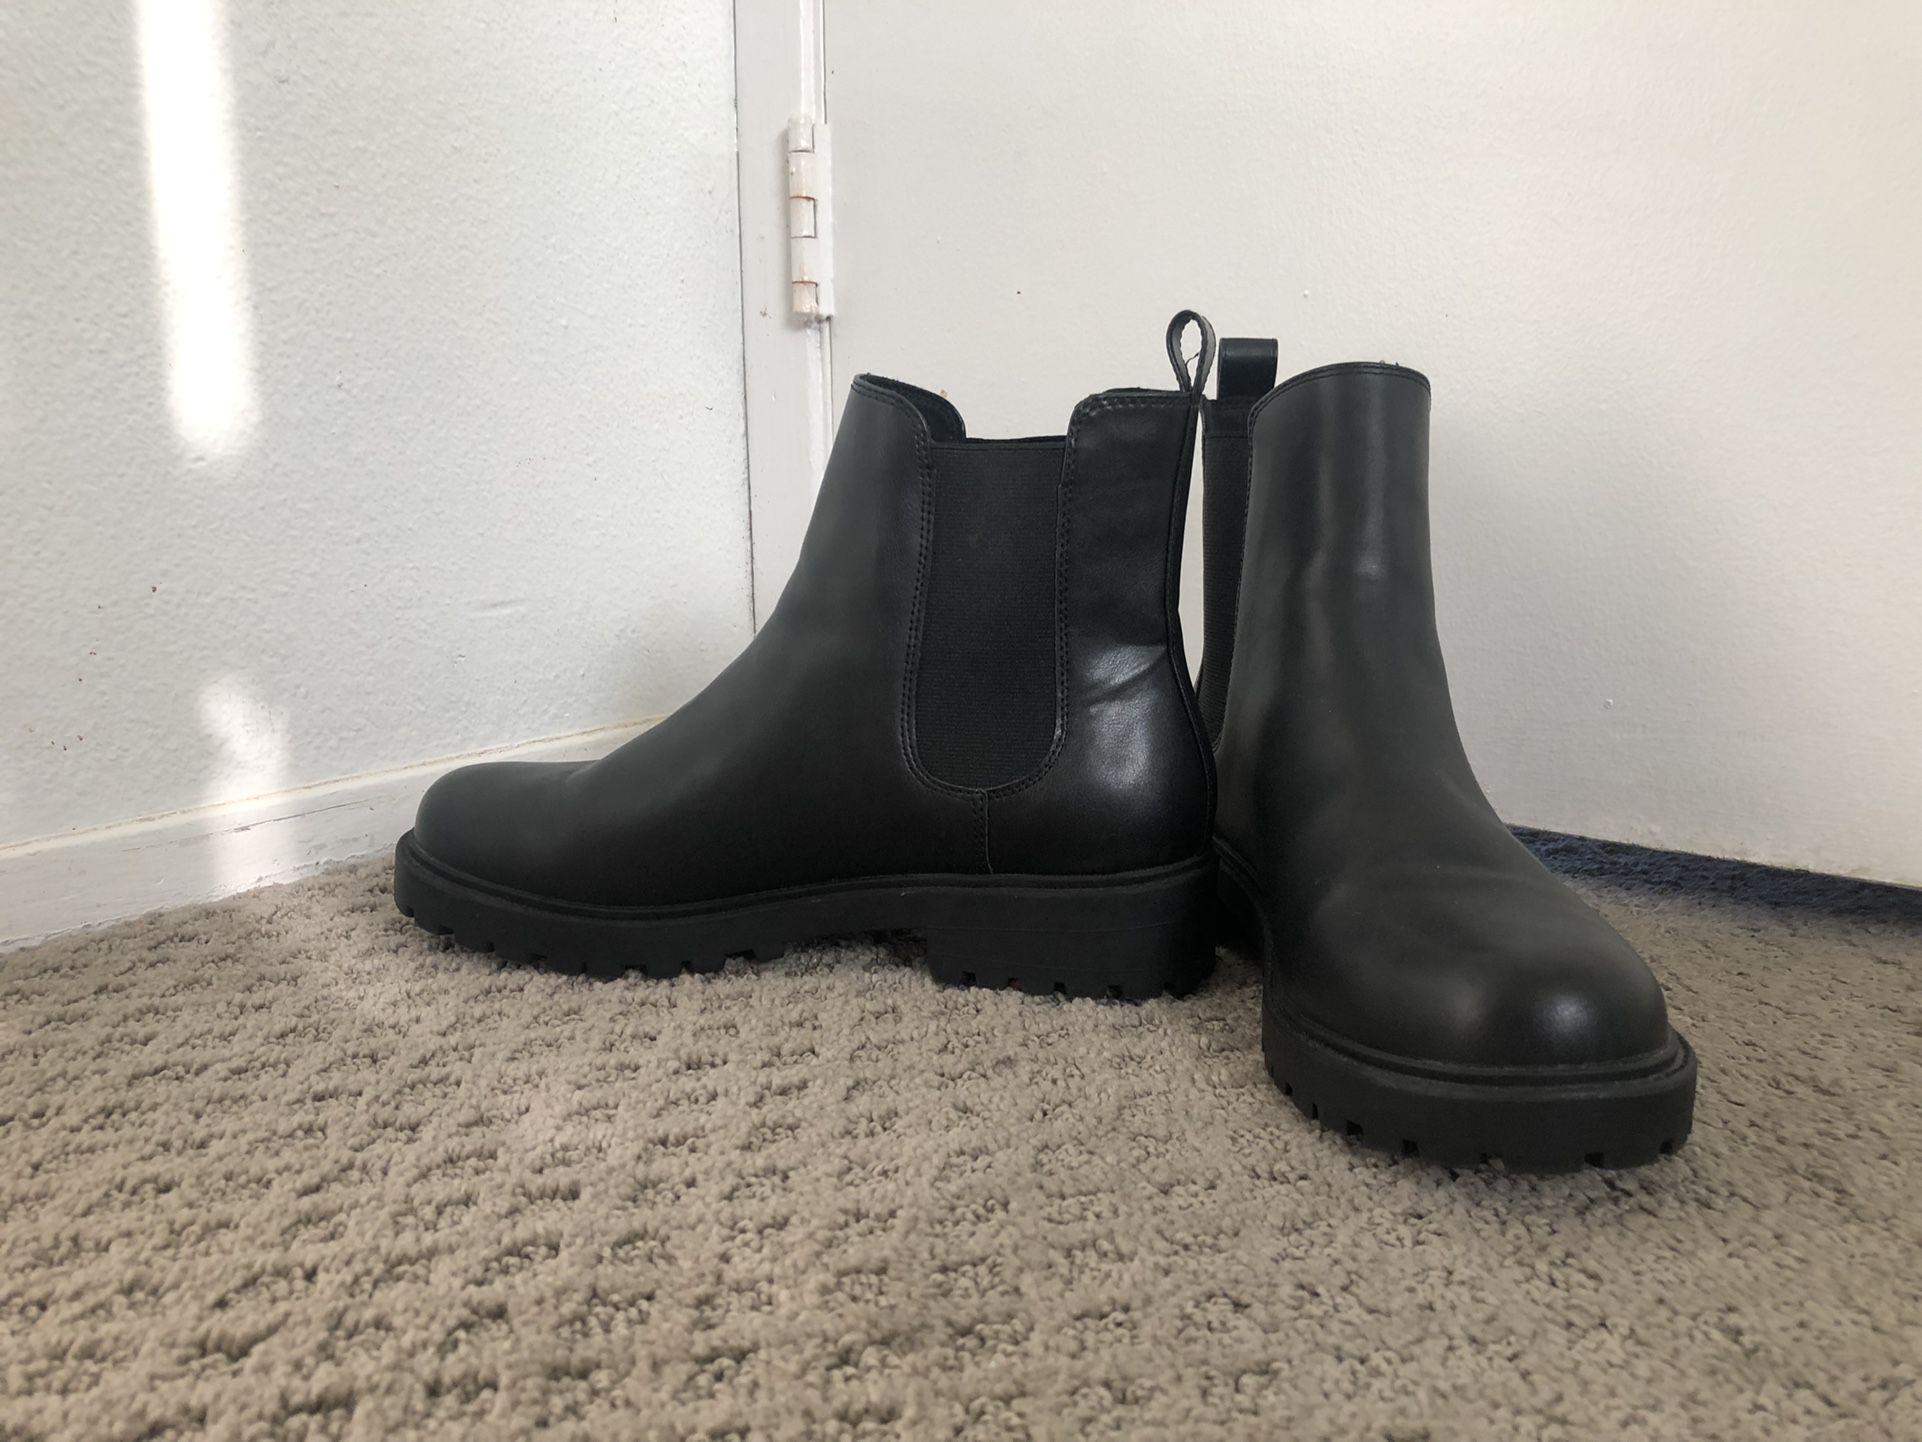 H&M Boots Women Size 10 Only Used Once for Sale in San Diego, CA - OfferUp